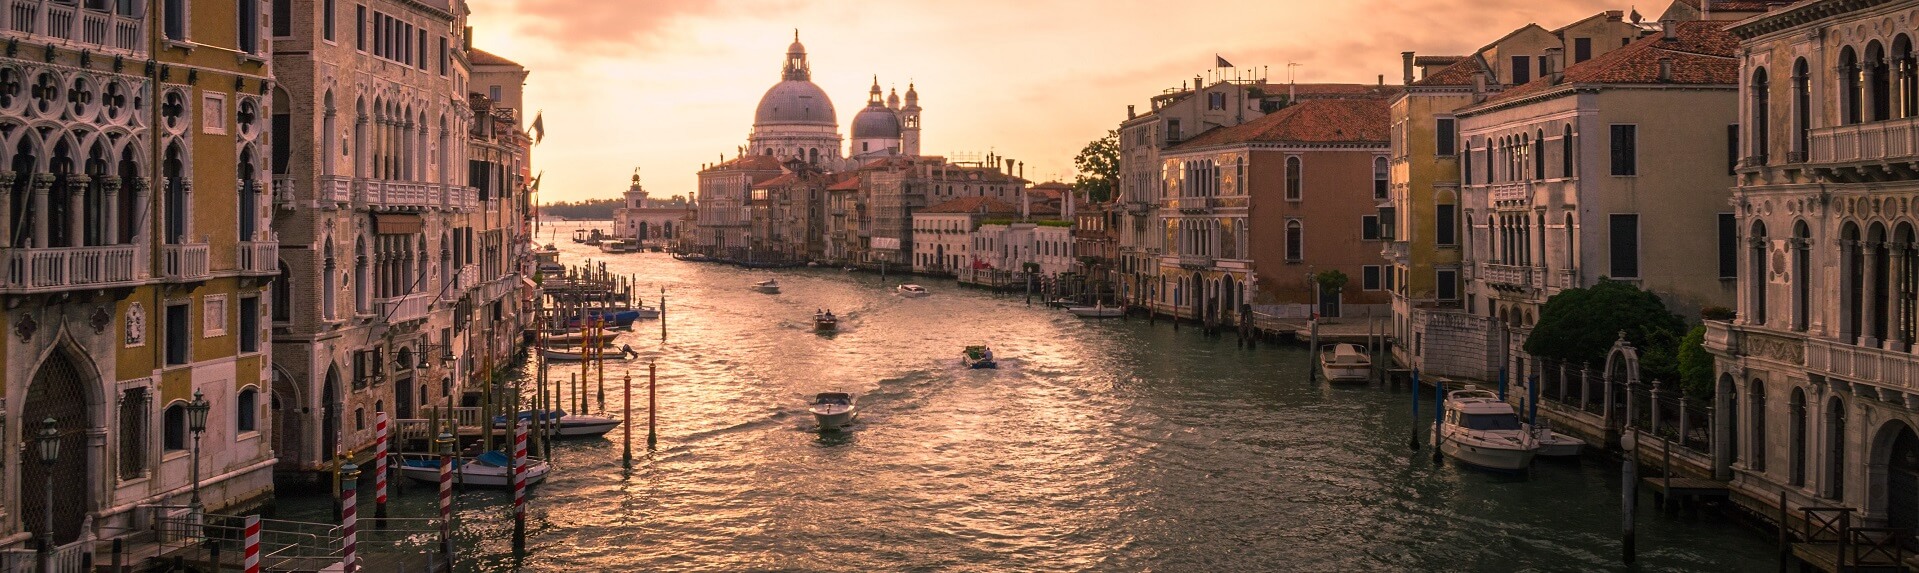 Why is the Grand Canal of Venice so famous?